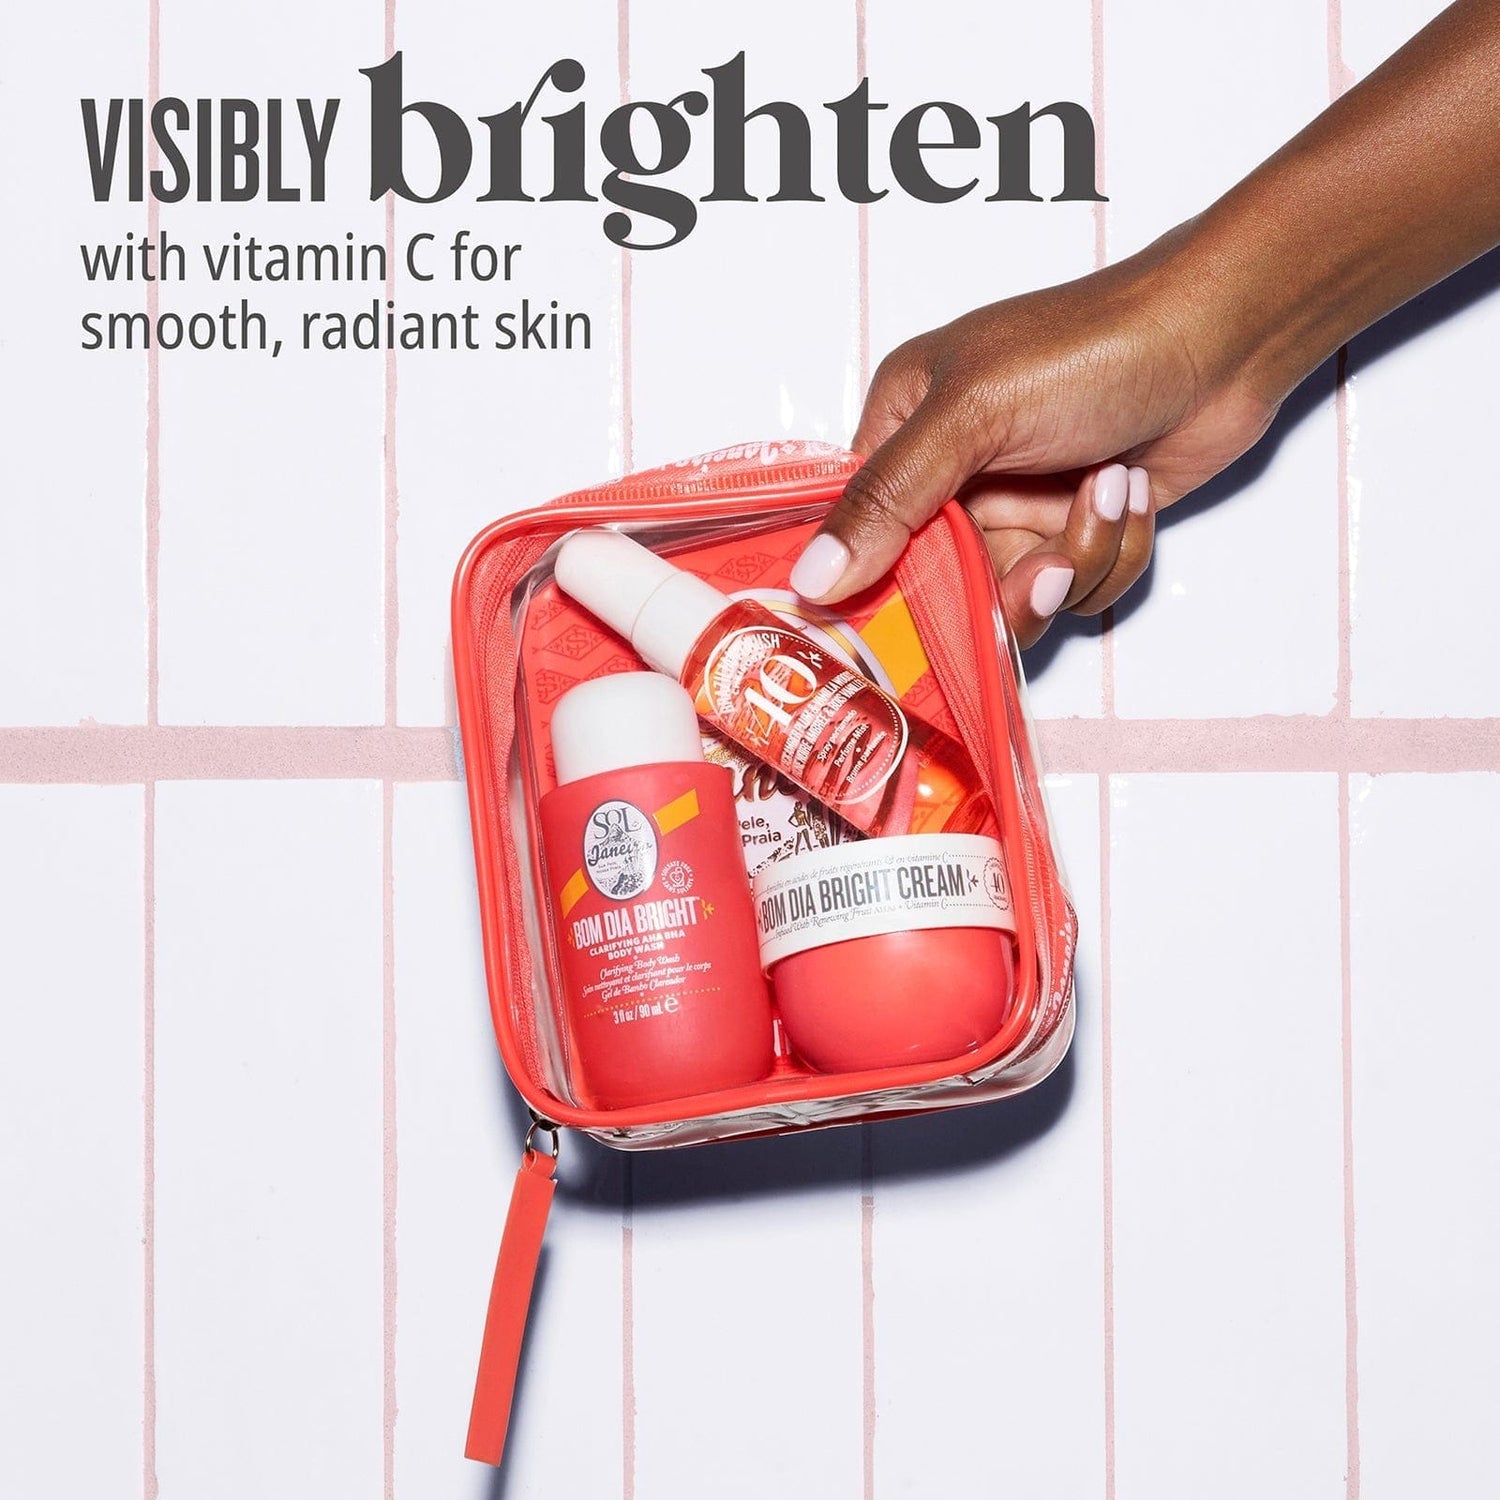 Visibly brighten with vitamin c for smooth, radiant skin